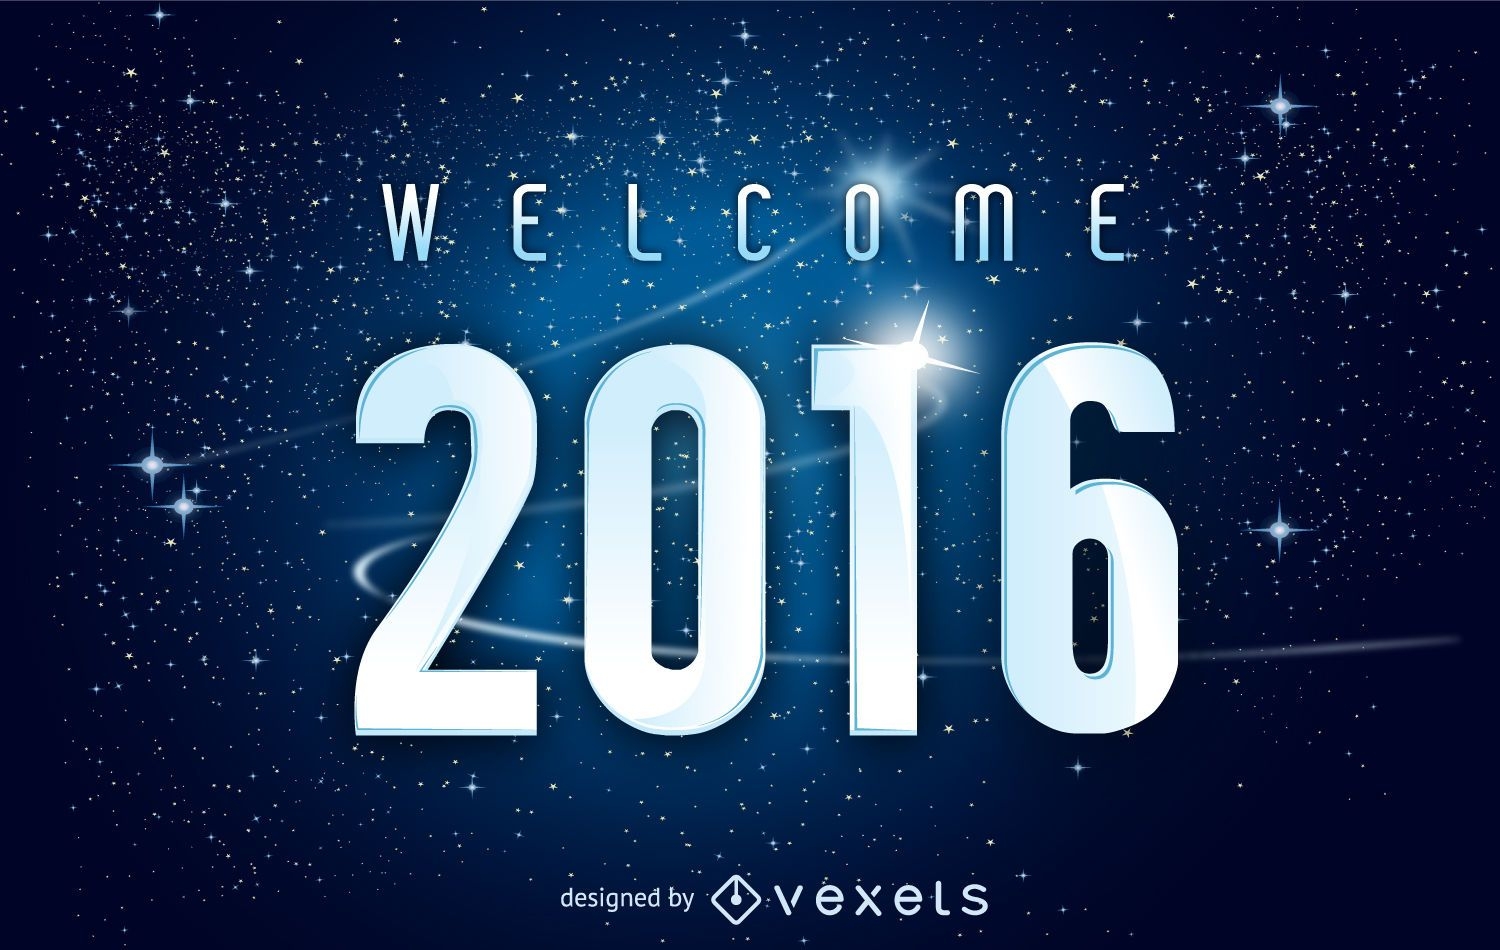 2016 New Year space image